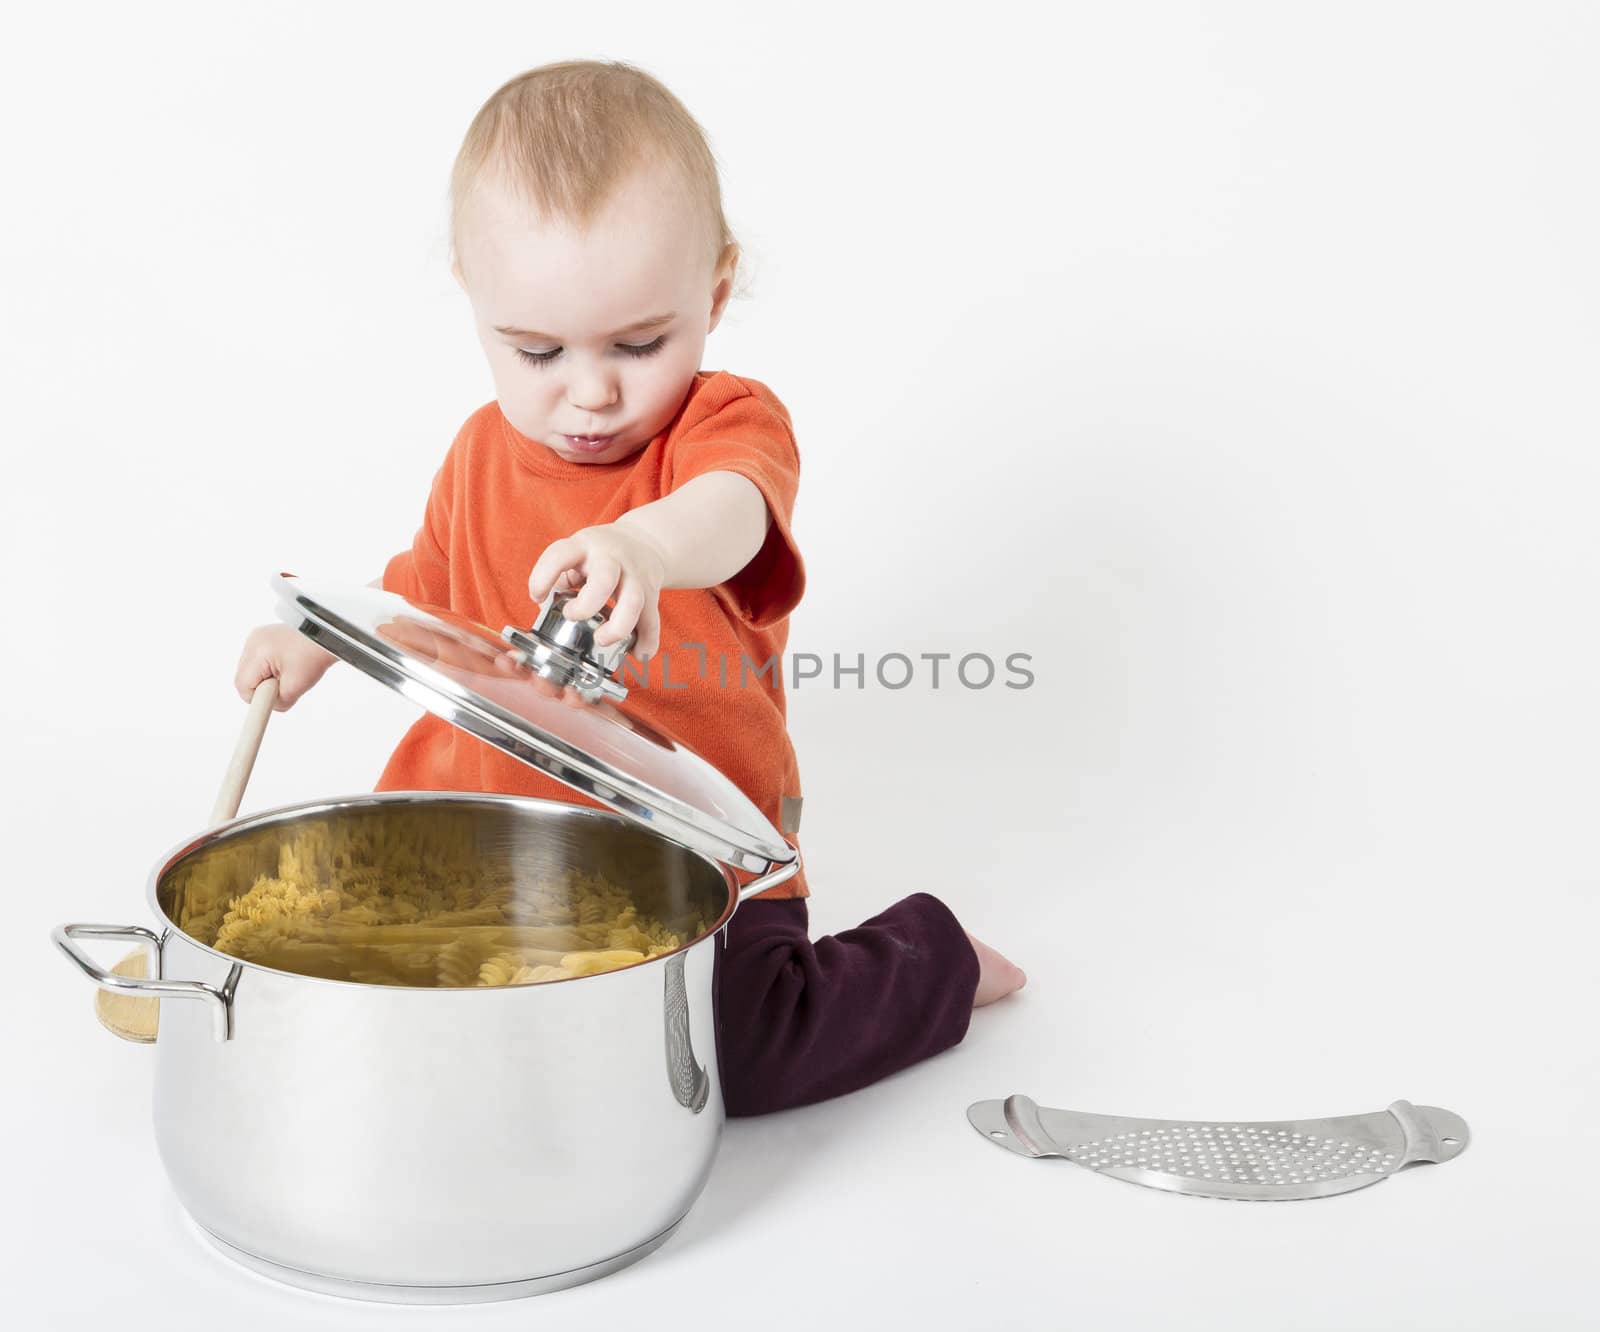 baby with big cooking pot in neutral grey background